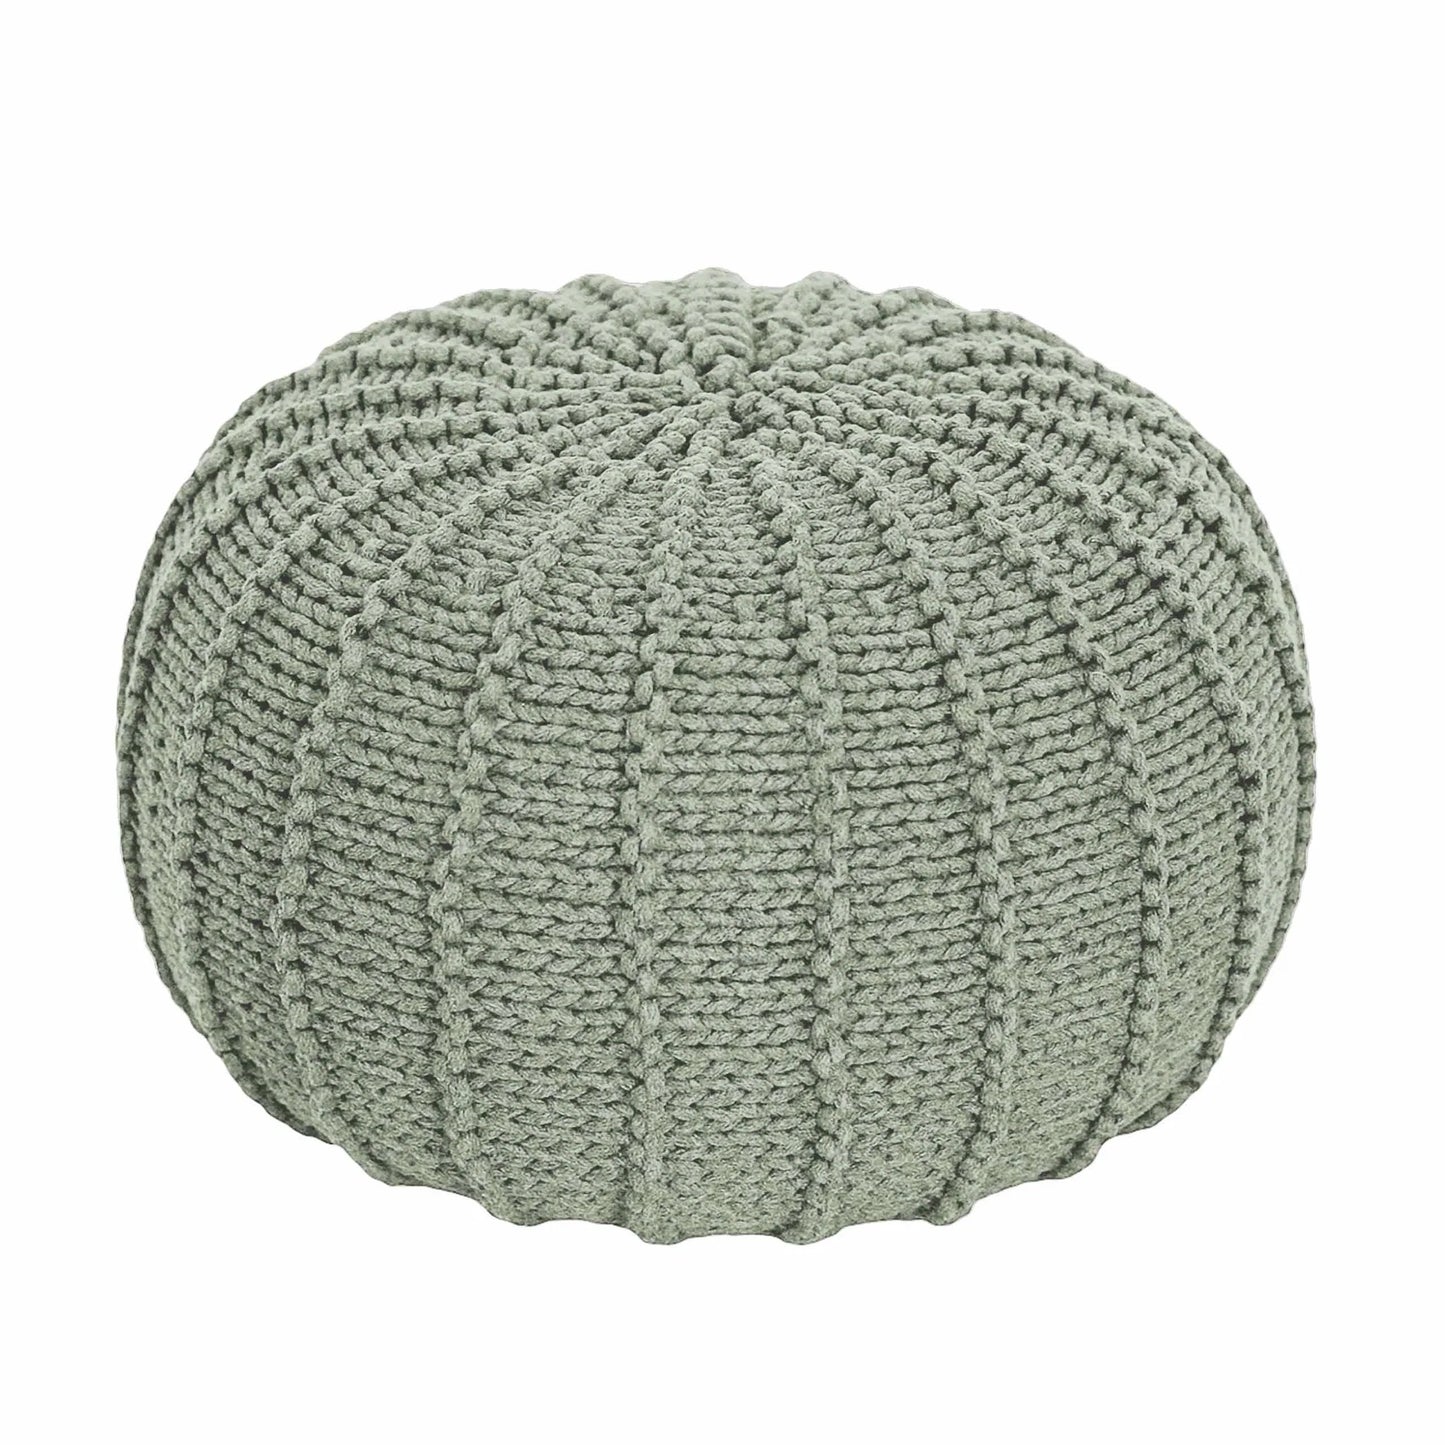 Zuri House Knitted Pouffe - Small - Light Olive